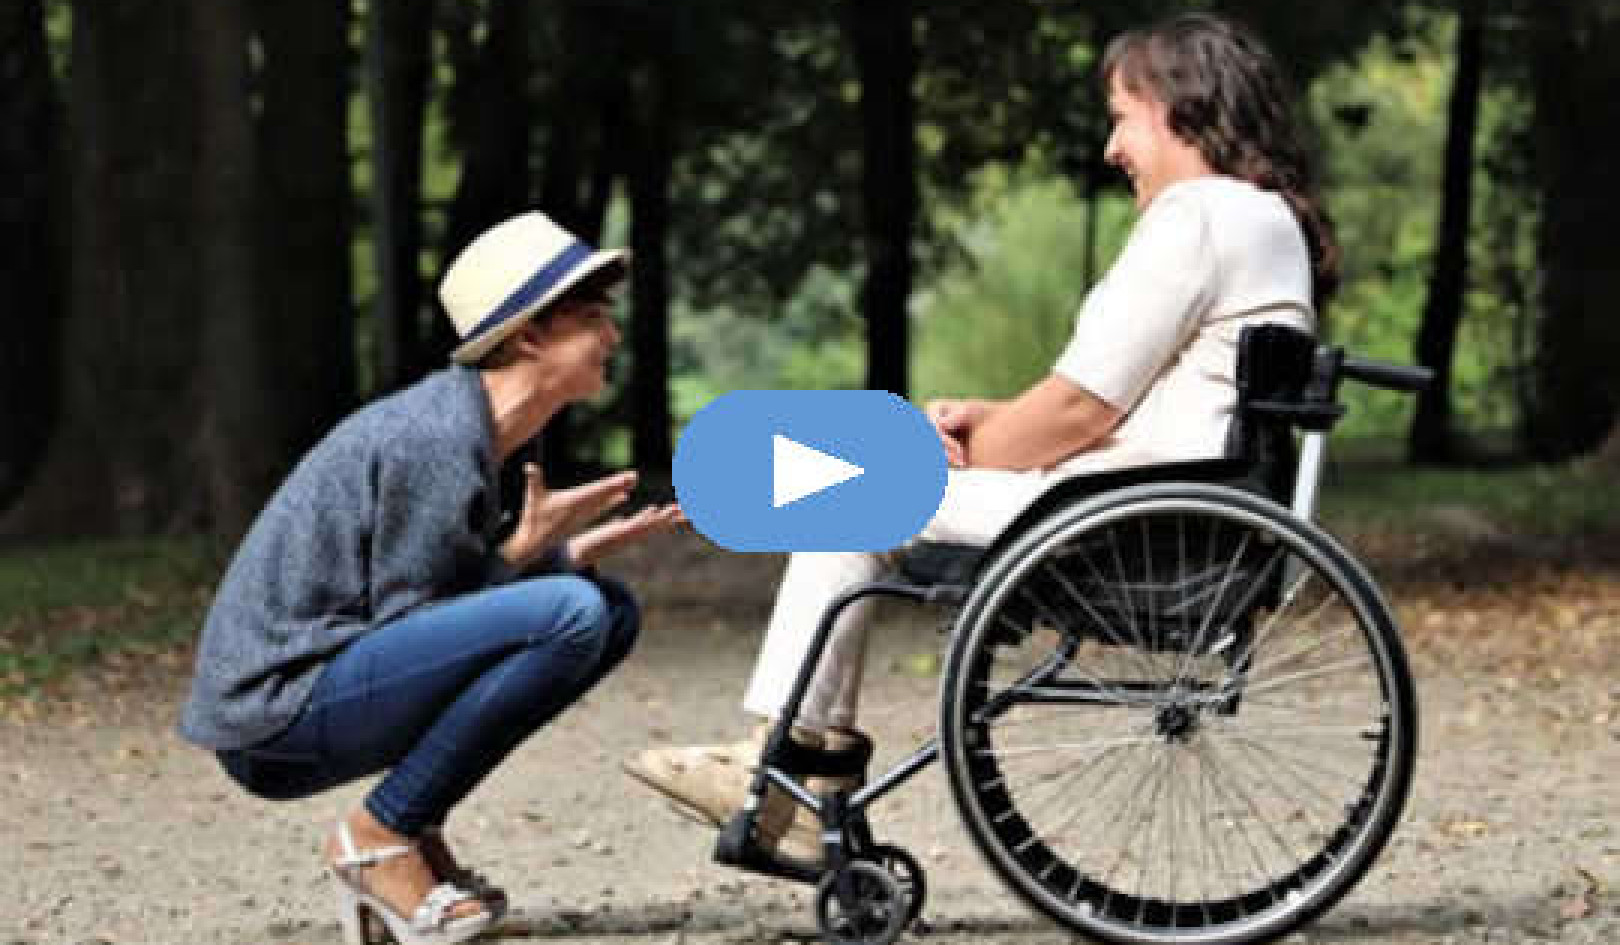 How To Deal with The Ups and Downs of Caregiving (Video)